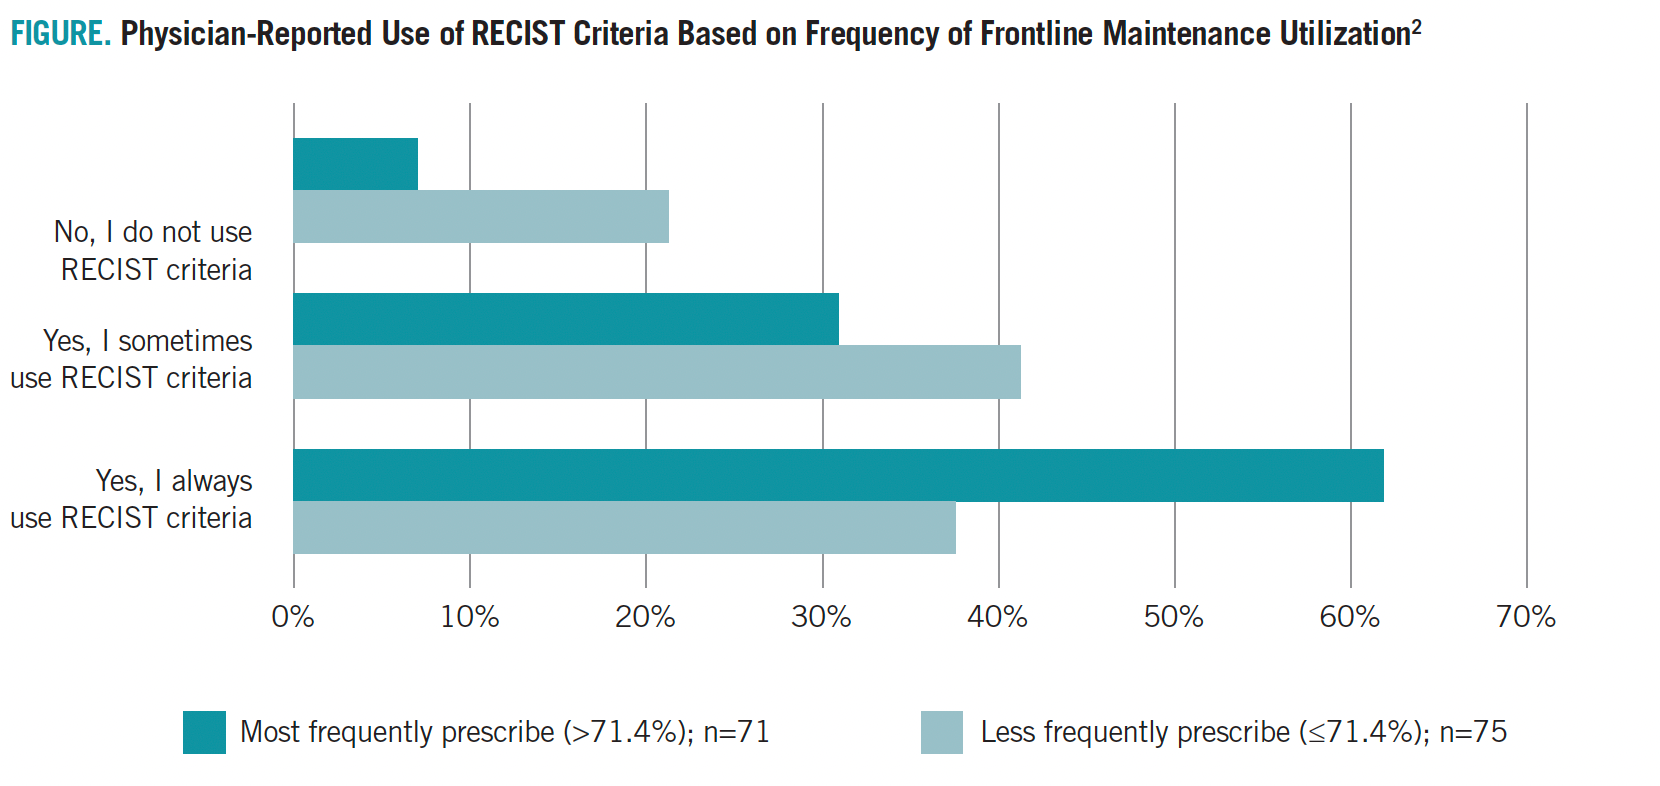 FIGURE. Physician-Reported Use of RECIST Criteria Based on Frequency of Frontline Maintenance Utilization